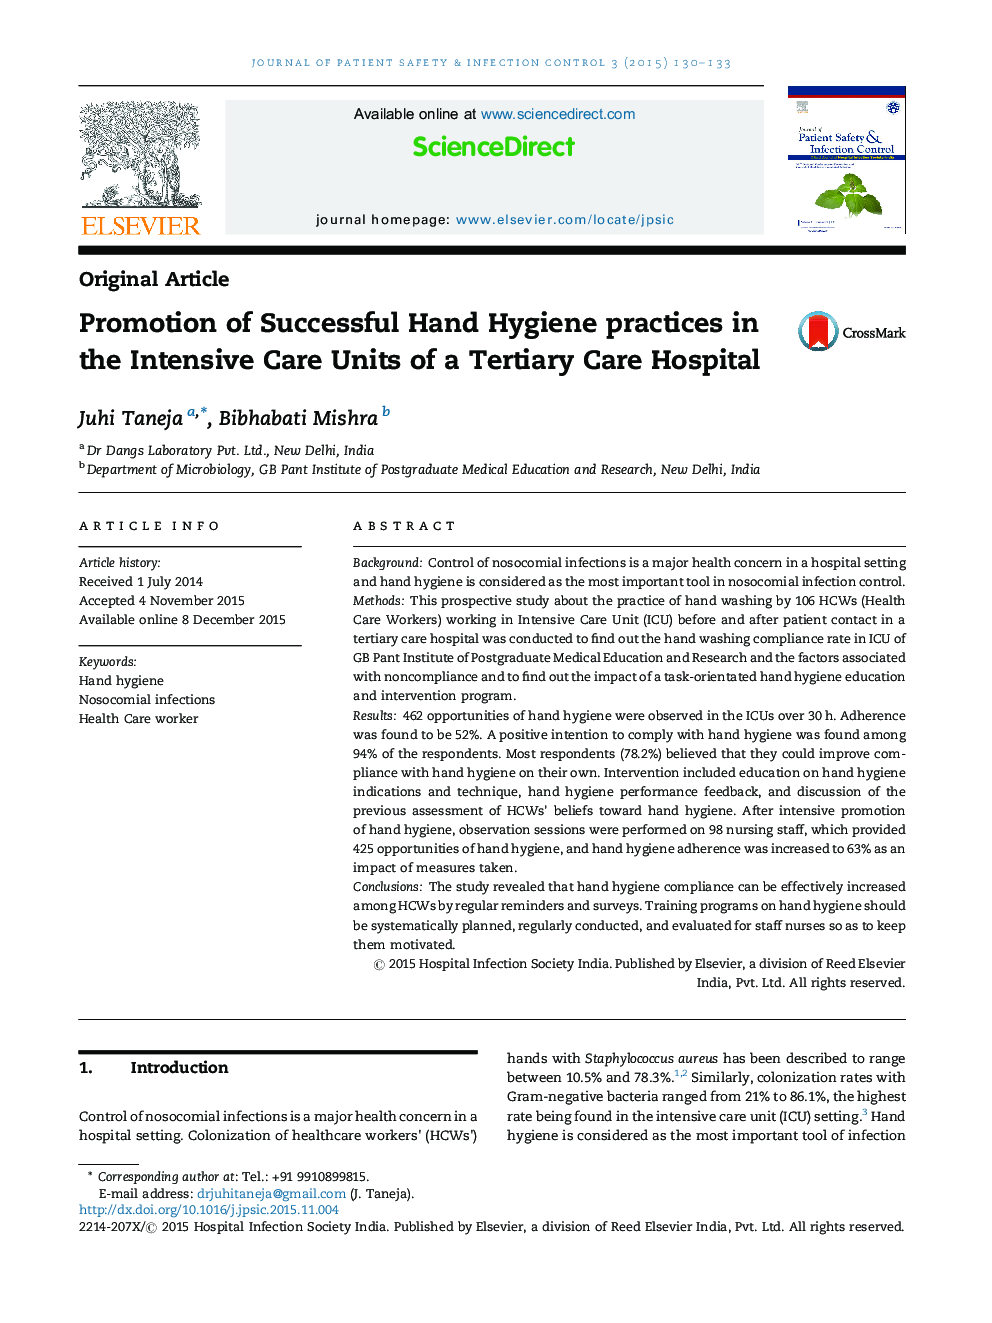 Promotion of Successful Hand Hygiene practices in the Intensive Care Units of a Tertiary Care Hospital